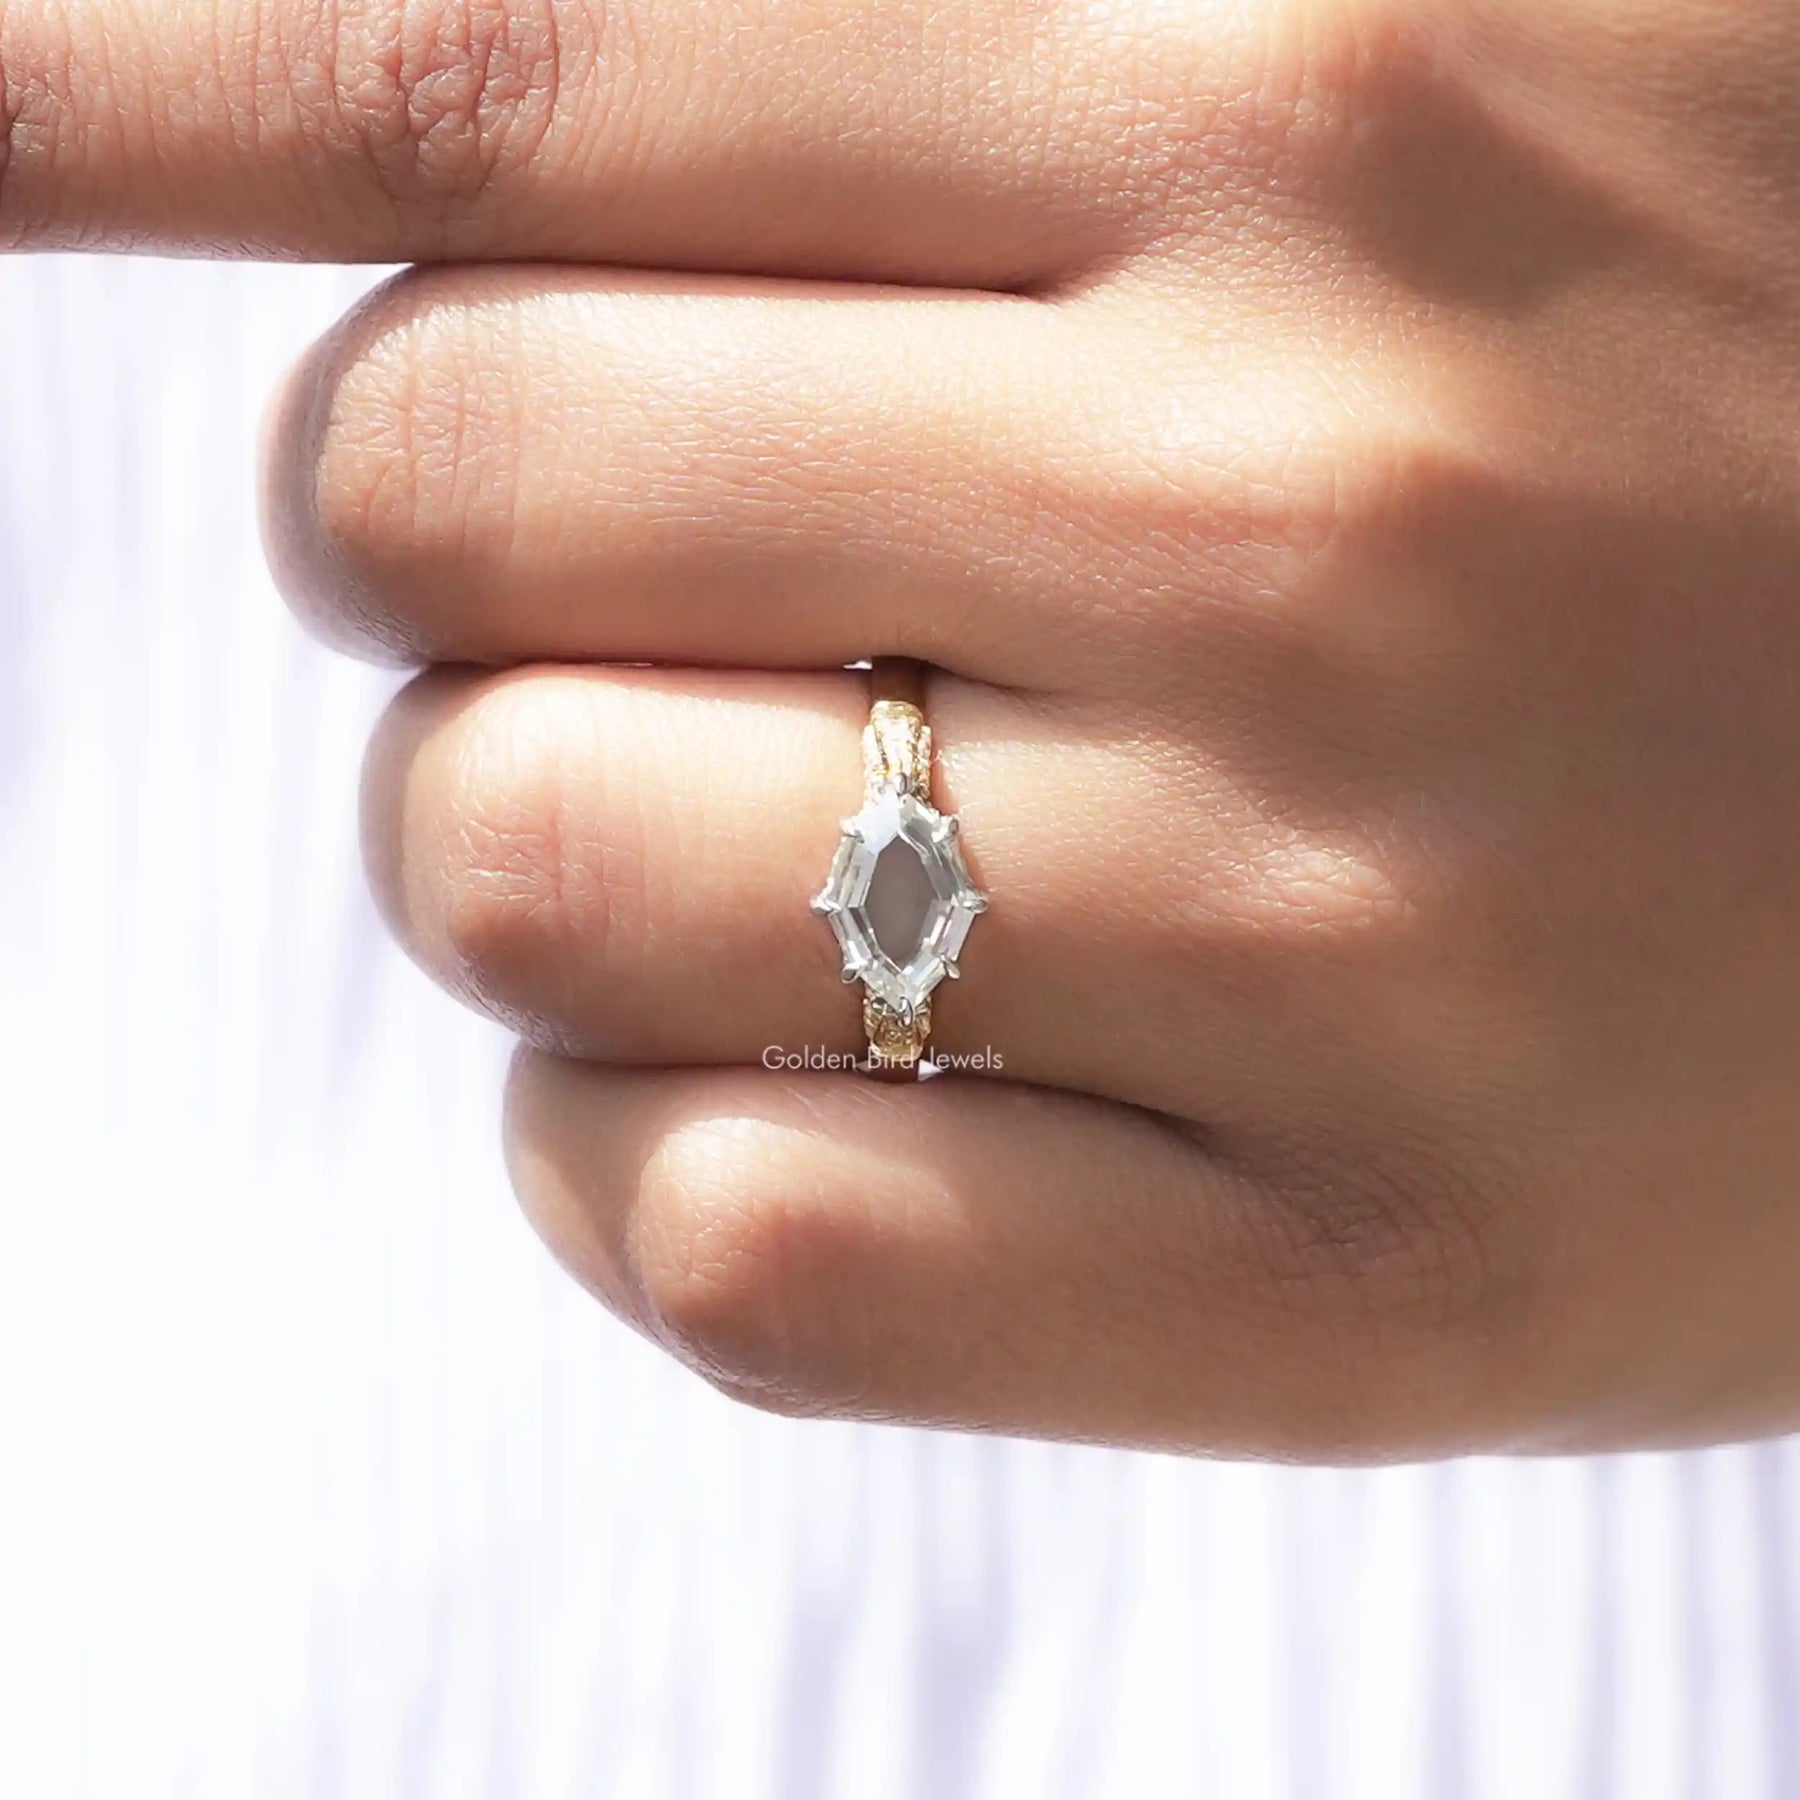 [This marquise cut moissanite ring made of prong setting]-[Golden Bird Jewels]